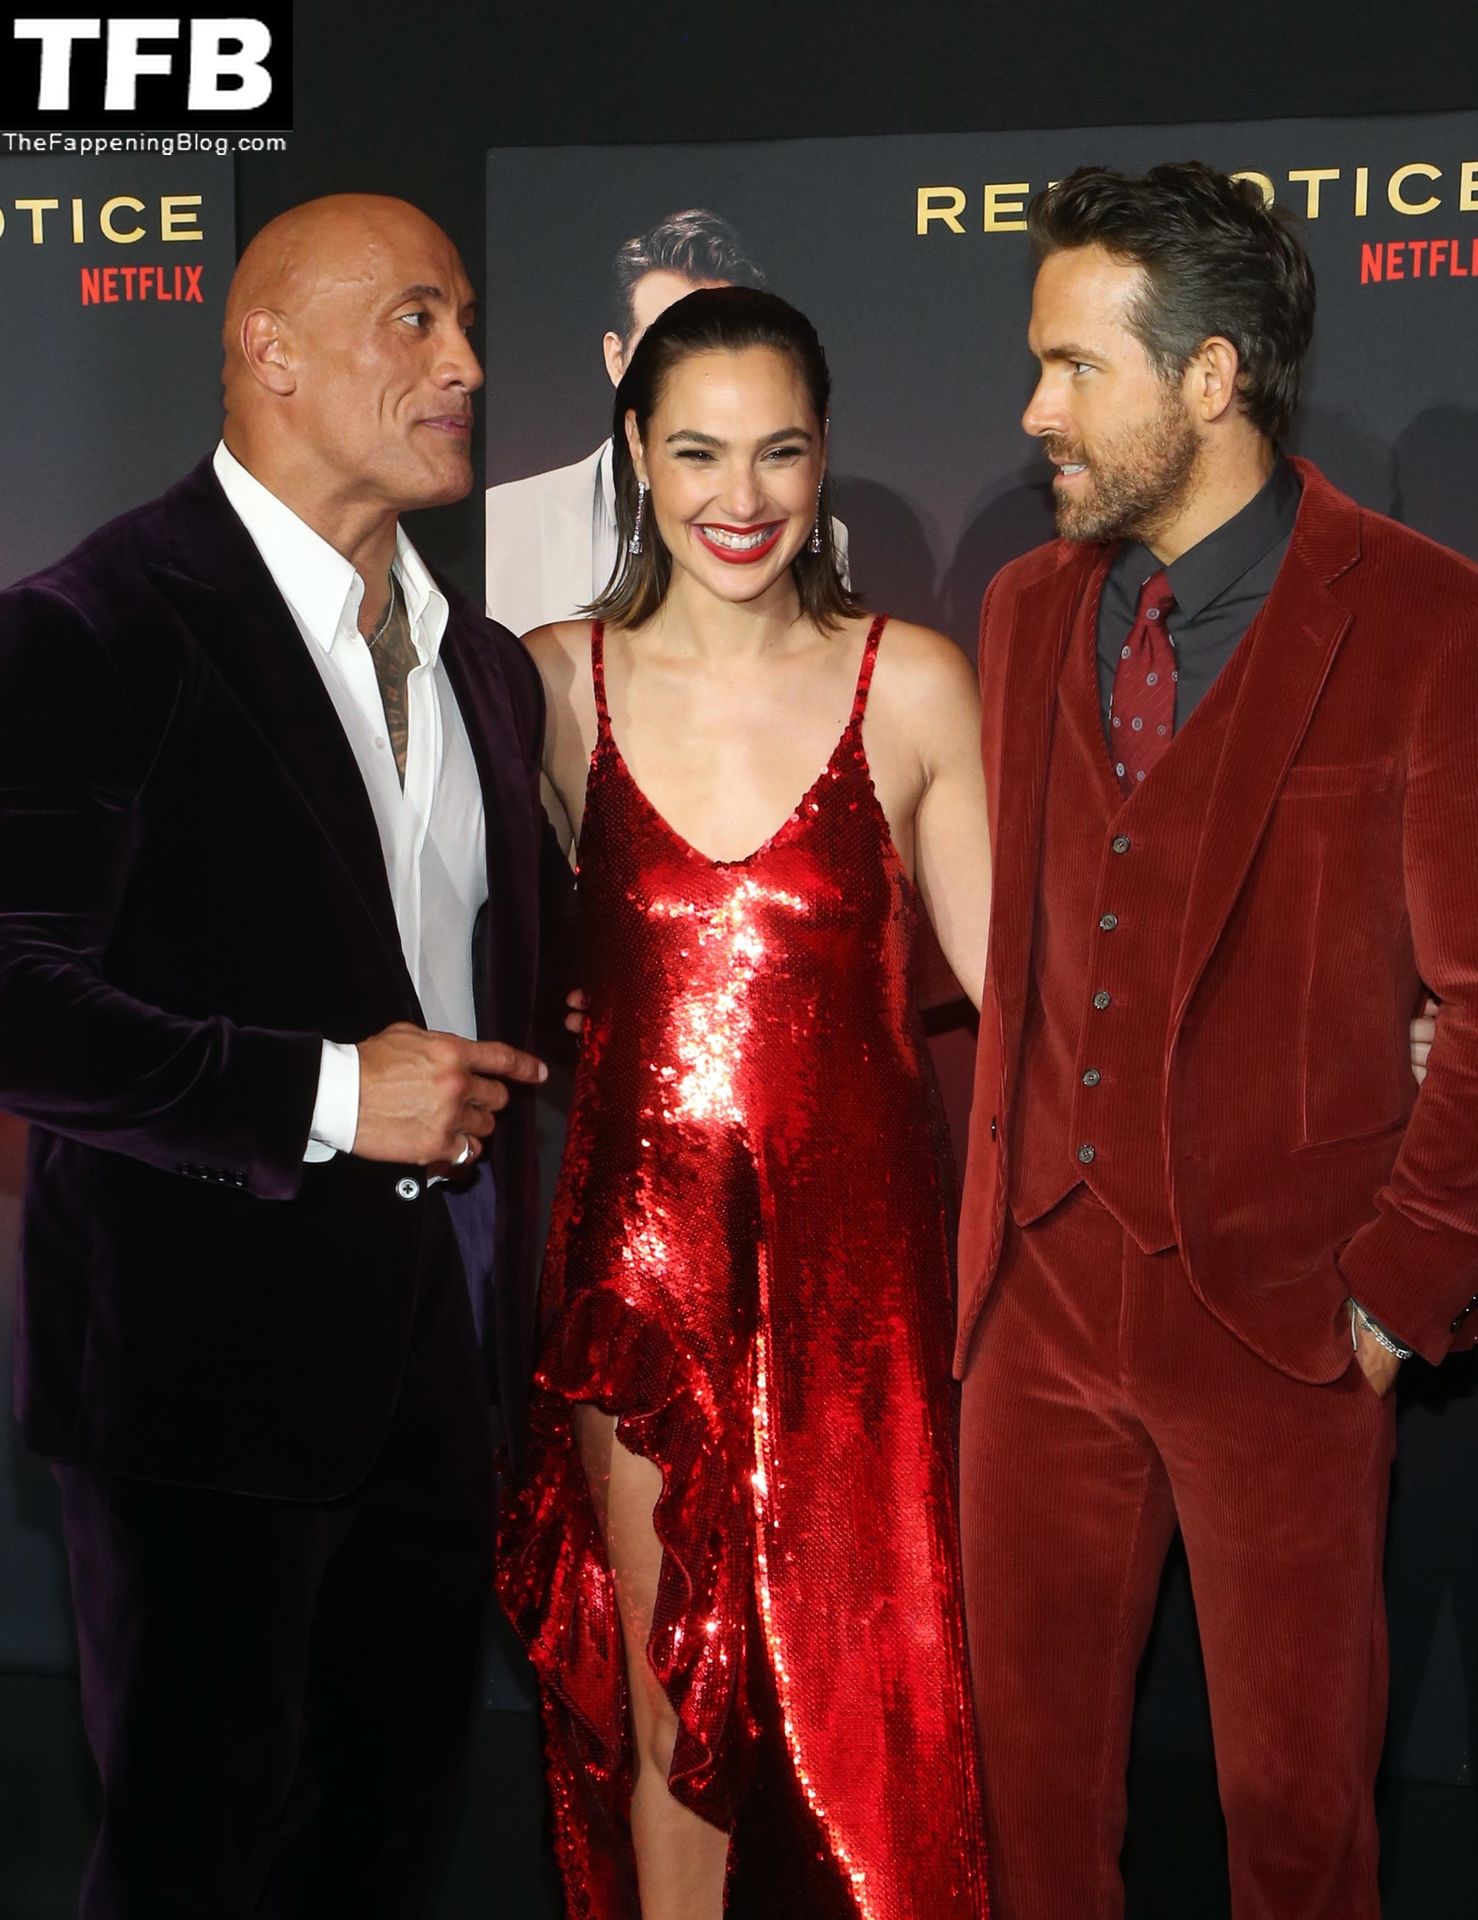 Gal Gadot Oozes Glamour in a Red Sequin Gown at the Red Notice Premiere in LA (168 Photos)